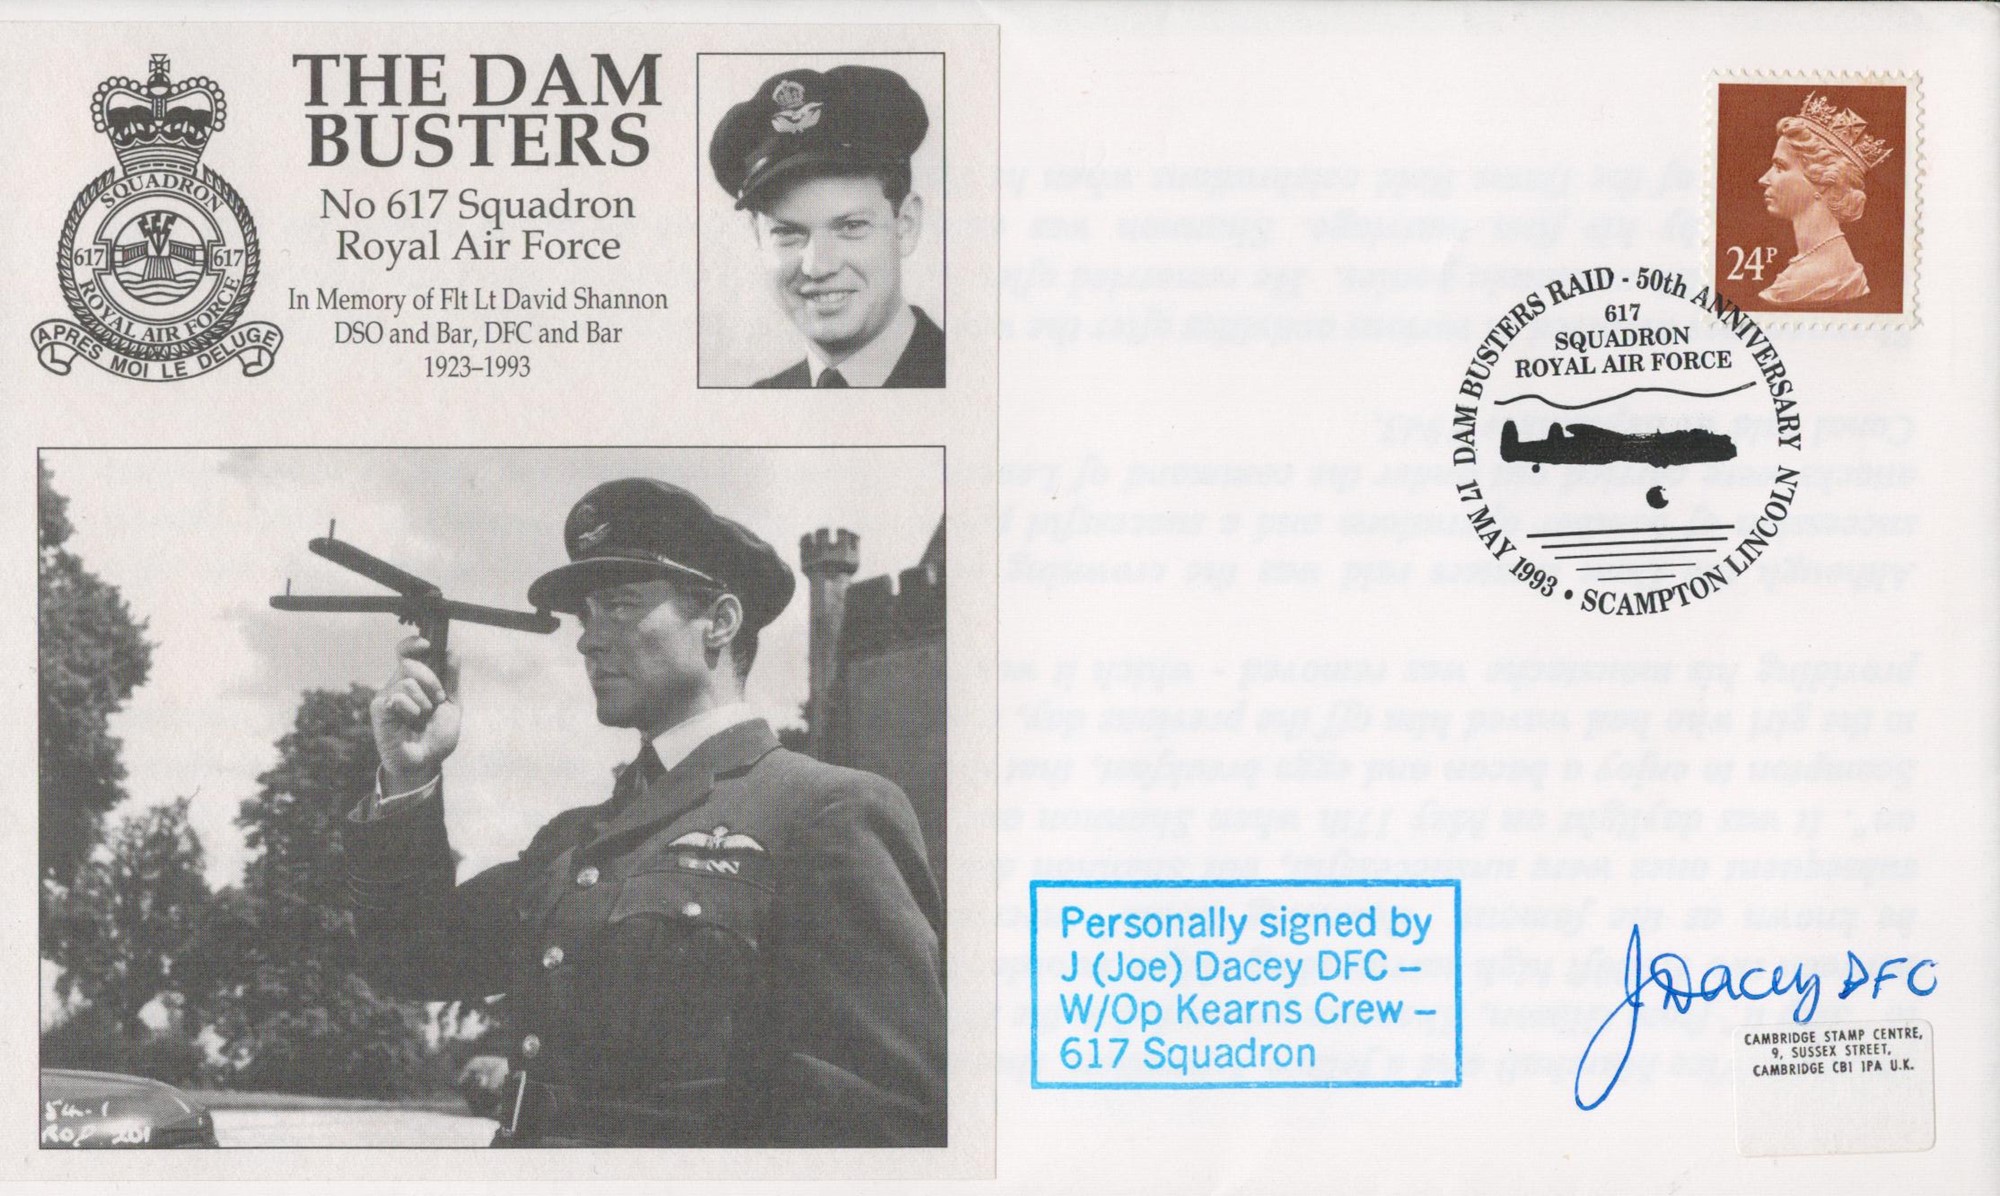 WW2 Joe Dacey DFC (Wireless Op Kearn's Crew) Signed The Dambusters FDC. 39 of 40 Covers Issued.